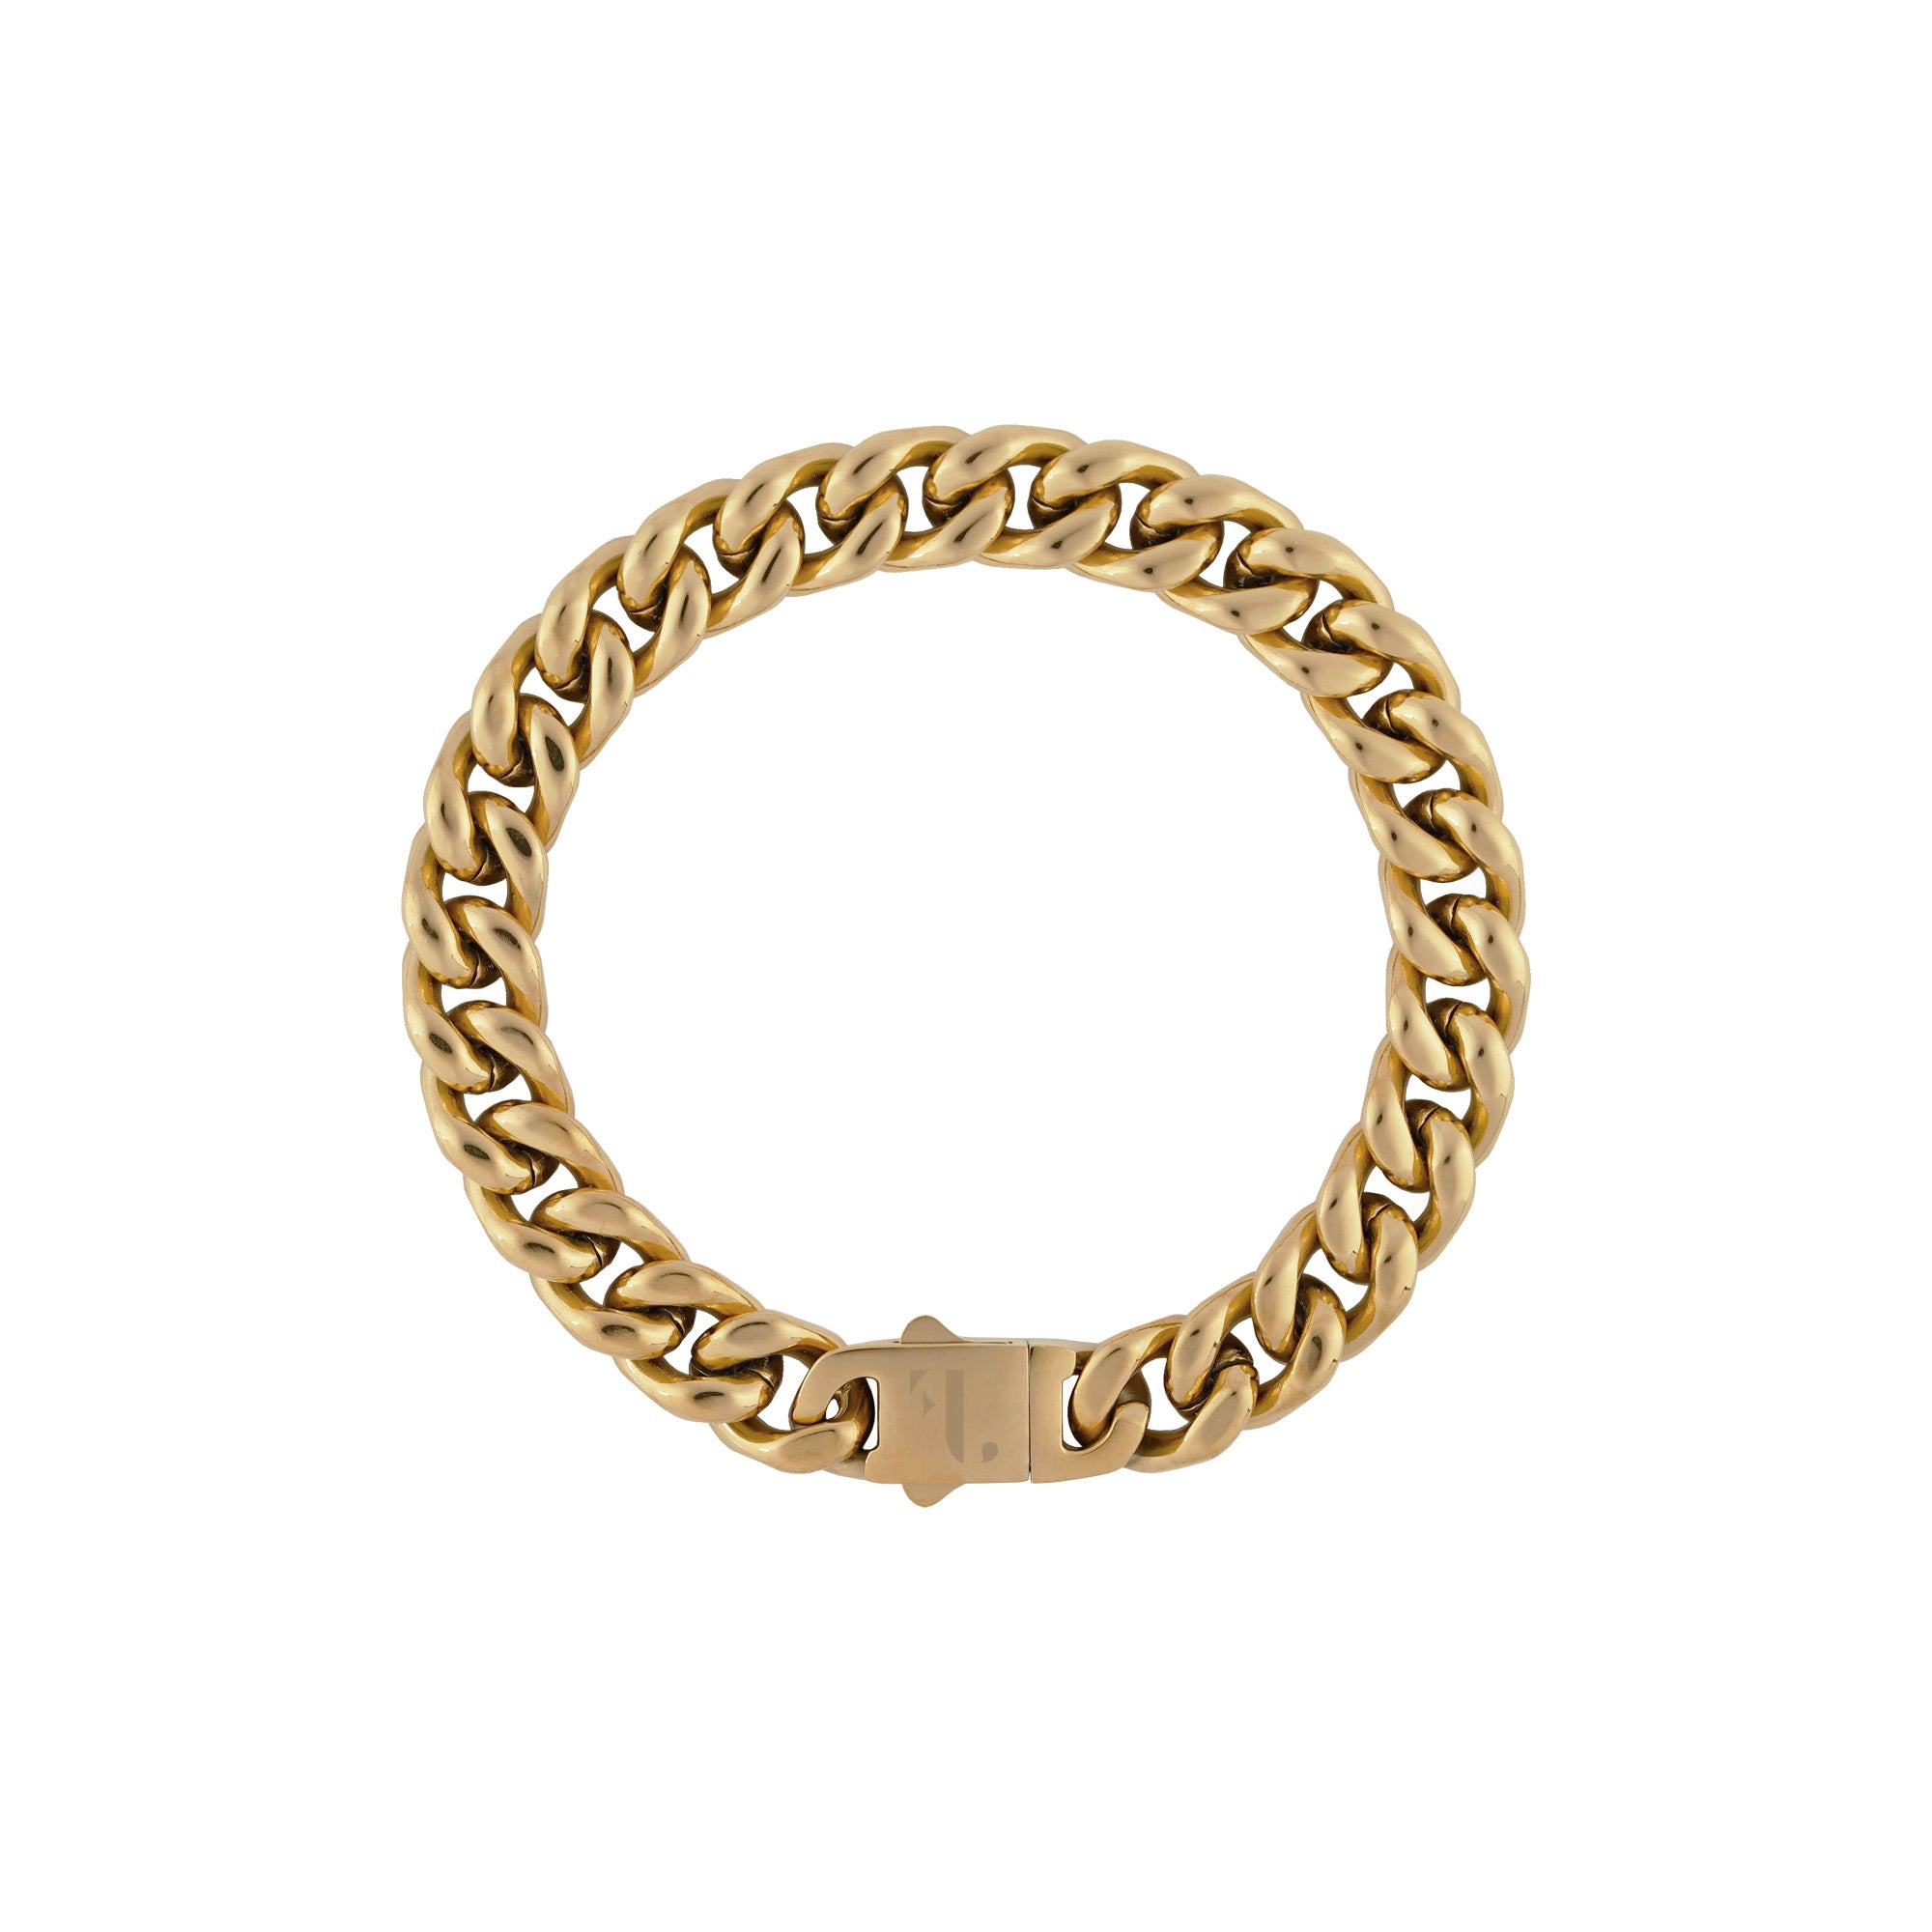 Cass men's bracelet by Five Jwlry, designed with a 10mm tightly woven Cuban link chain in a gold hue, crafted from water-resistant 316L stainless steel. Available in sizes 18cm, 20cm, 22cm, and 24cm. Hypoallergenic and accompanied by a 2-year warranty.